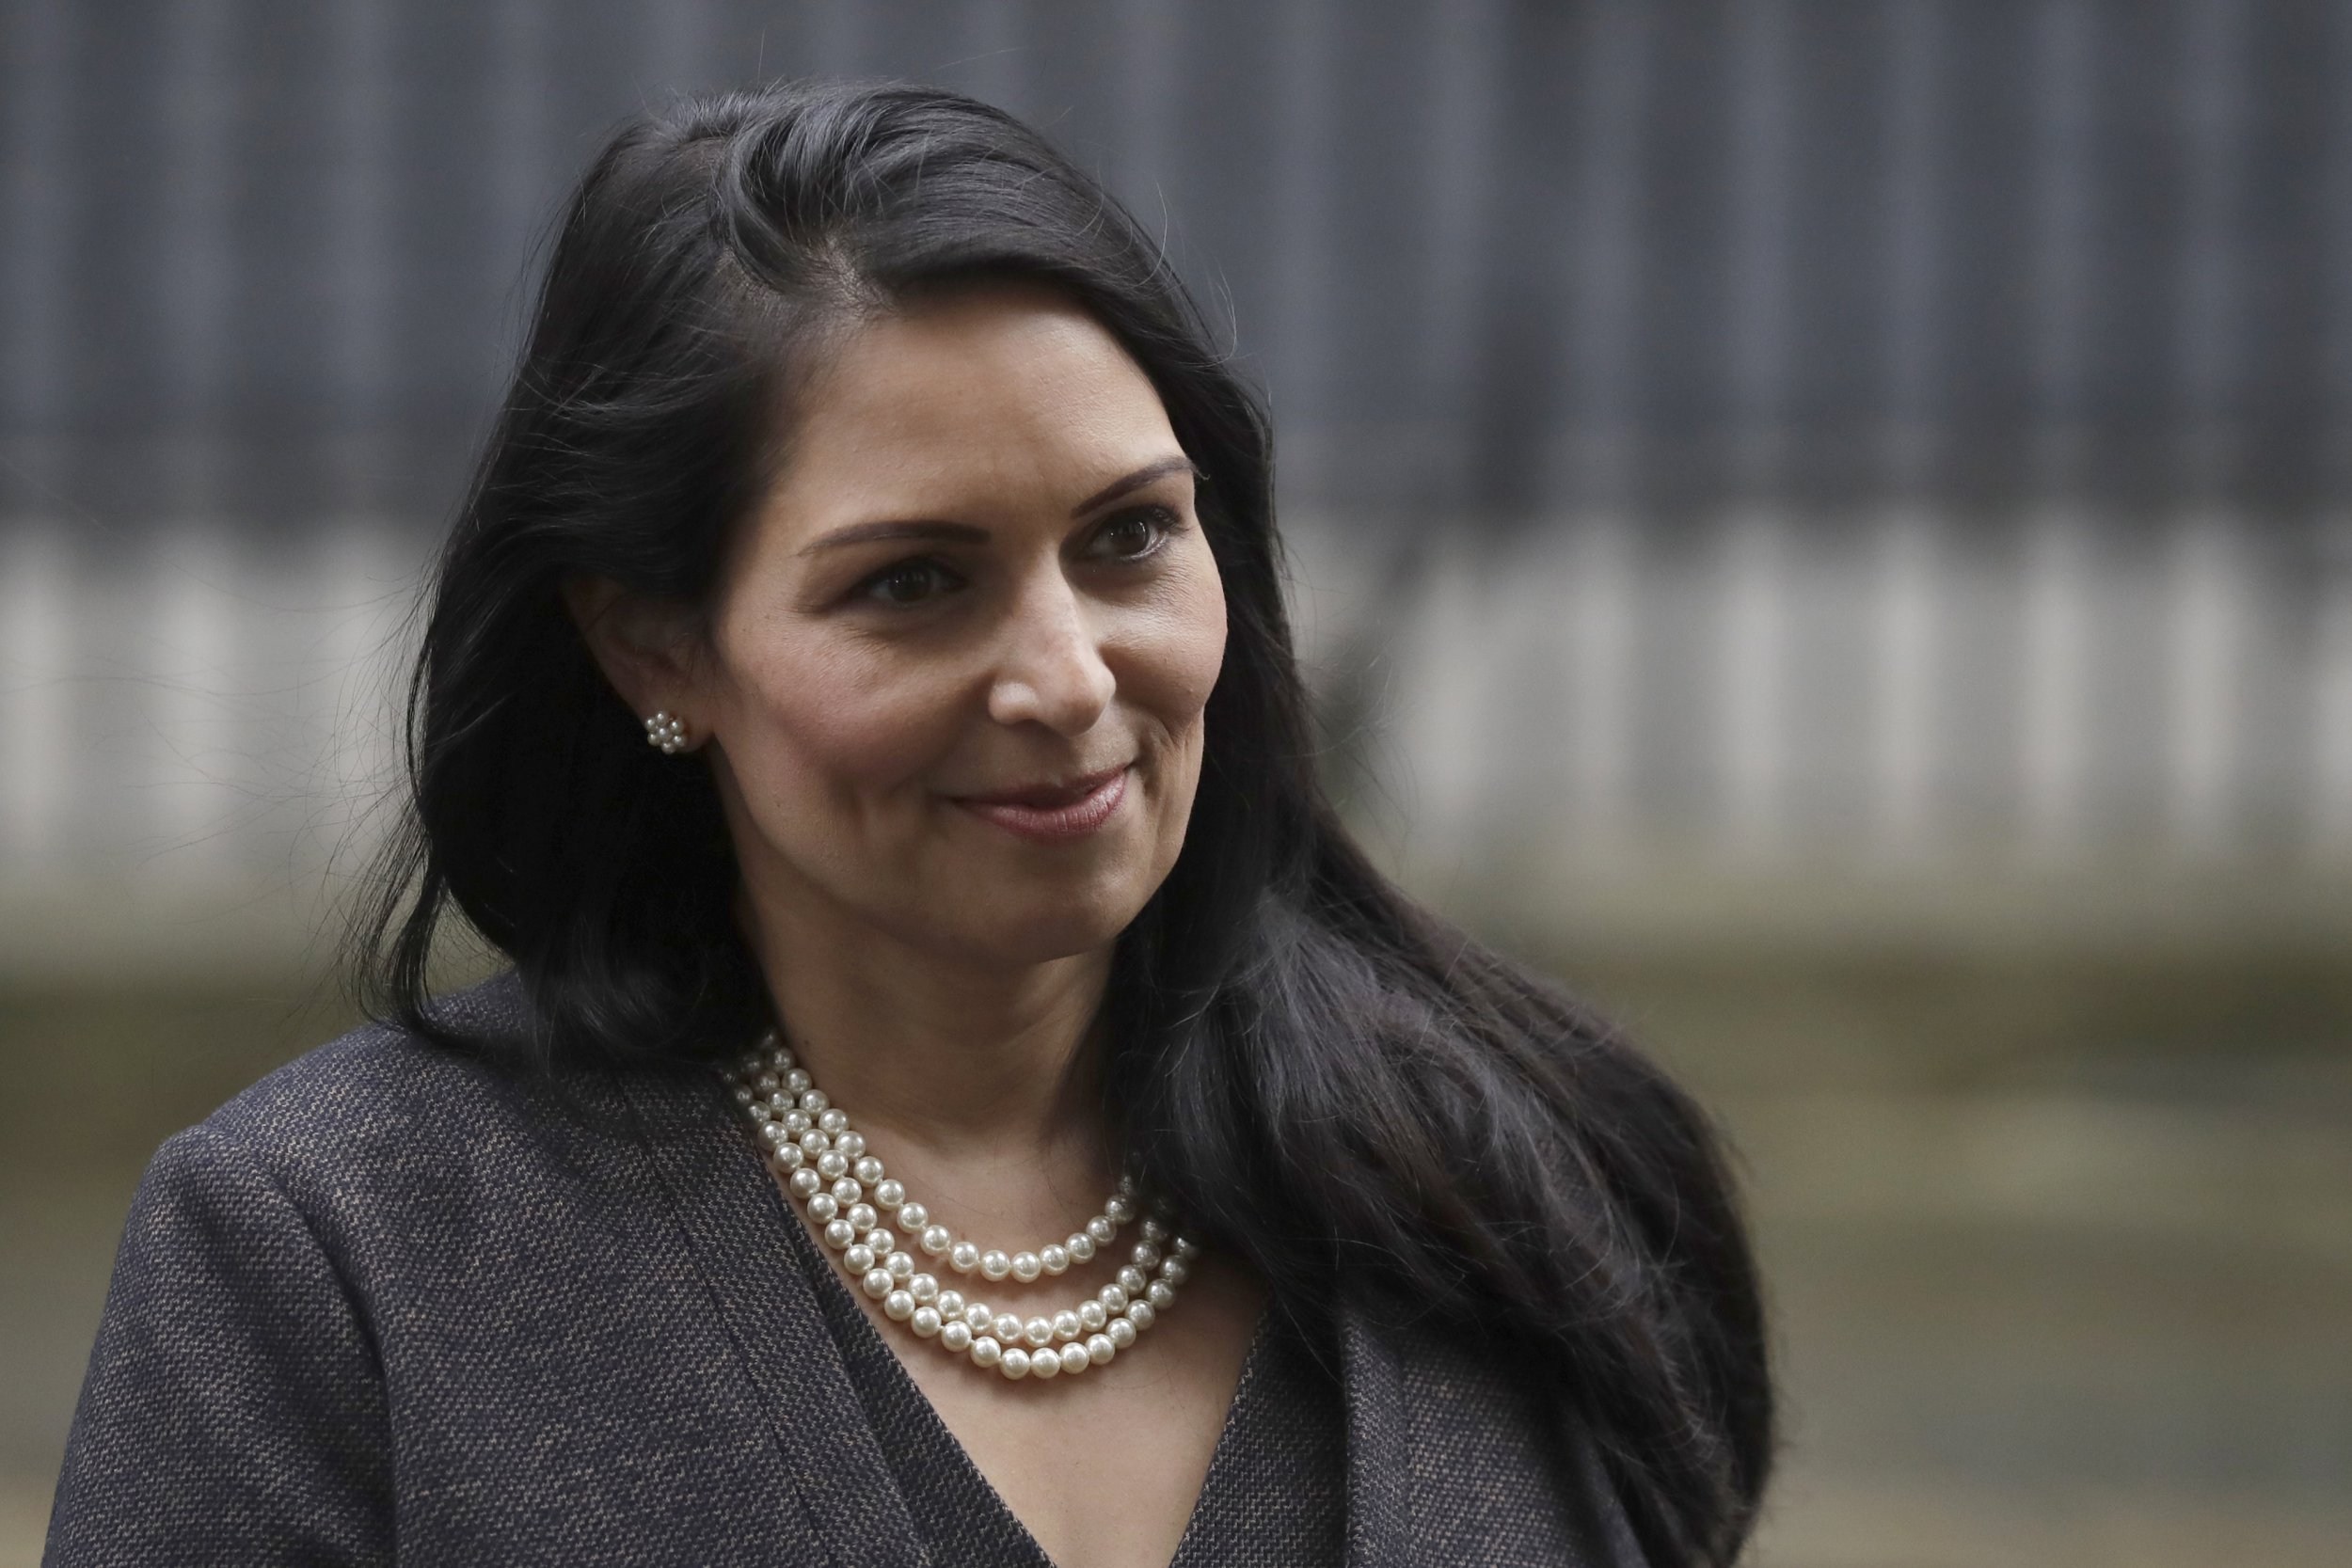 Home Office denies immigration boss quit ‘after run-ins with Priti Patel’